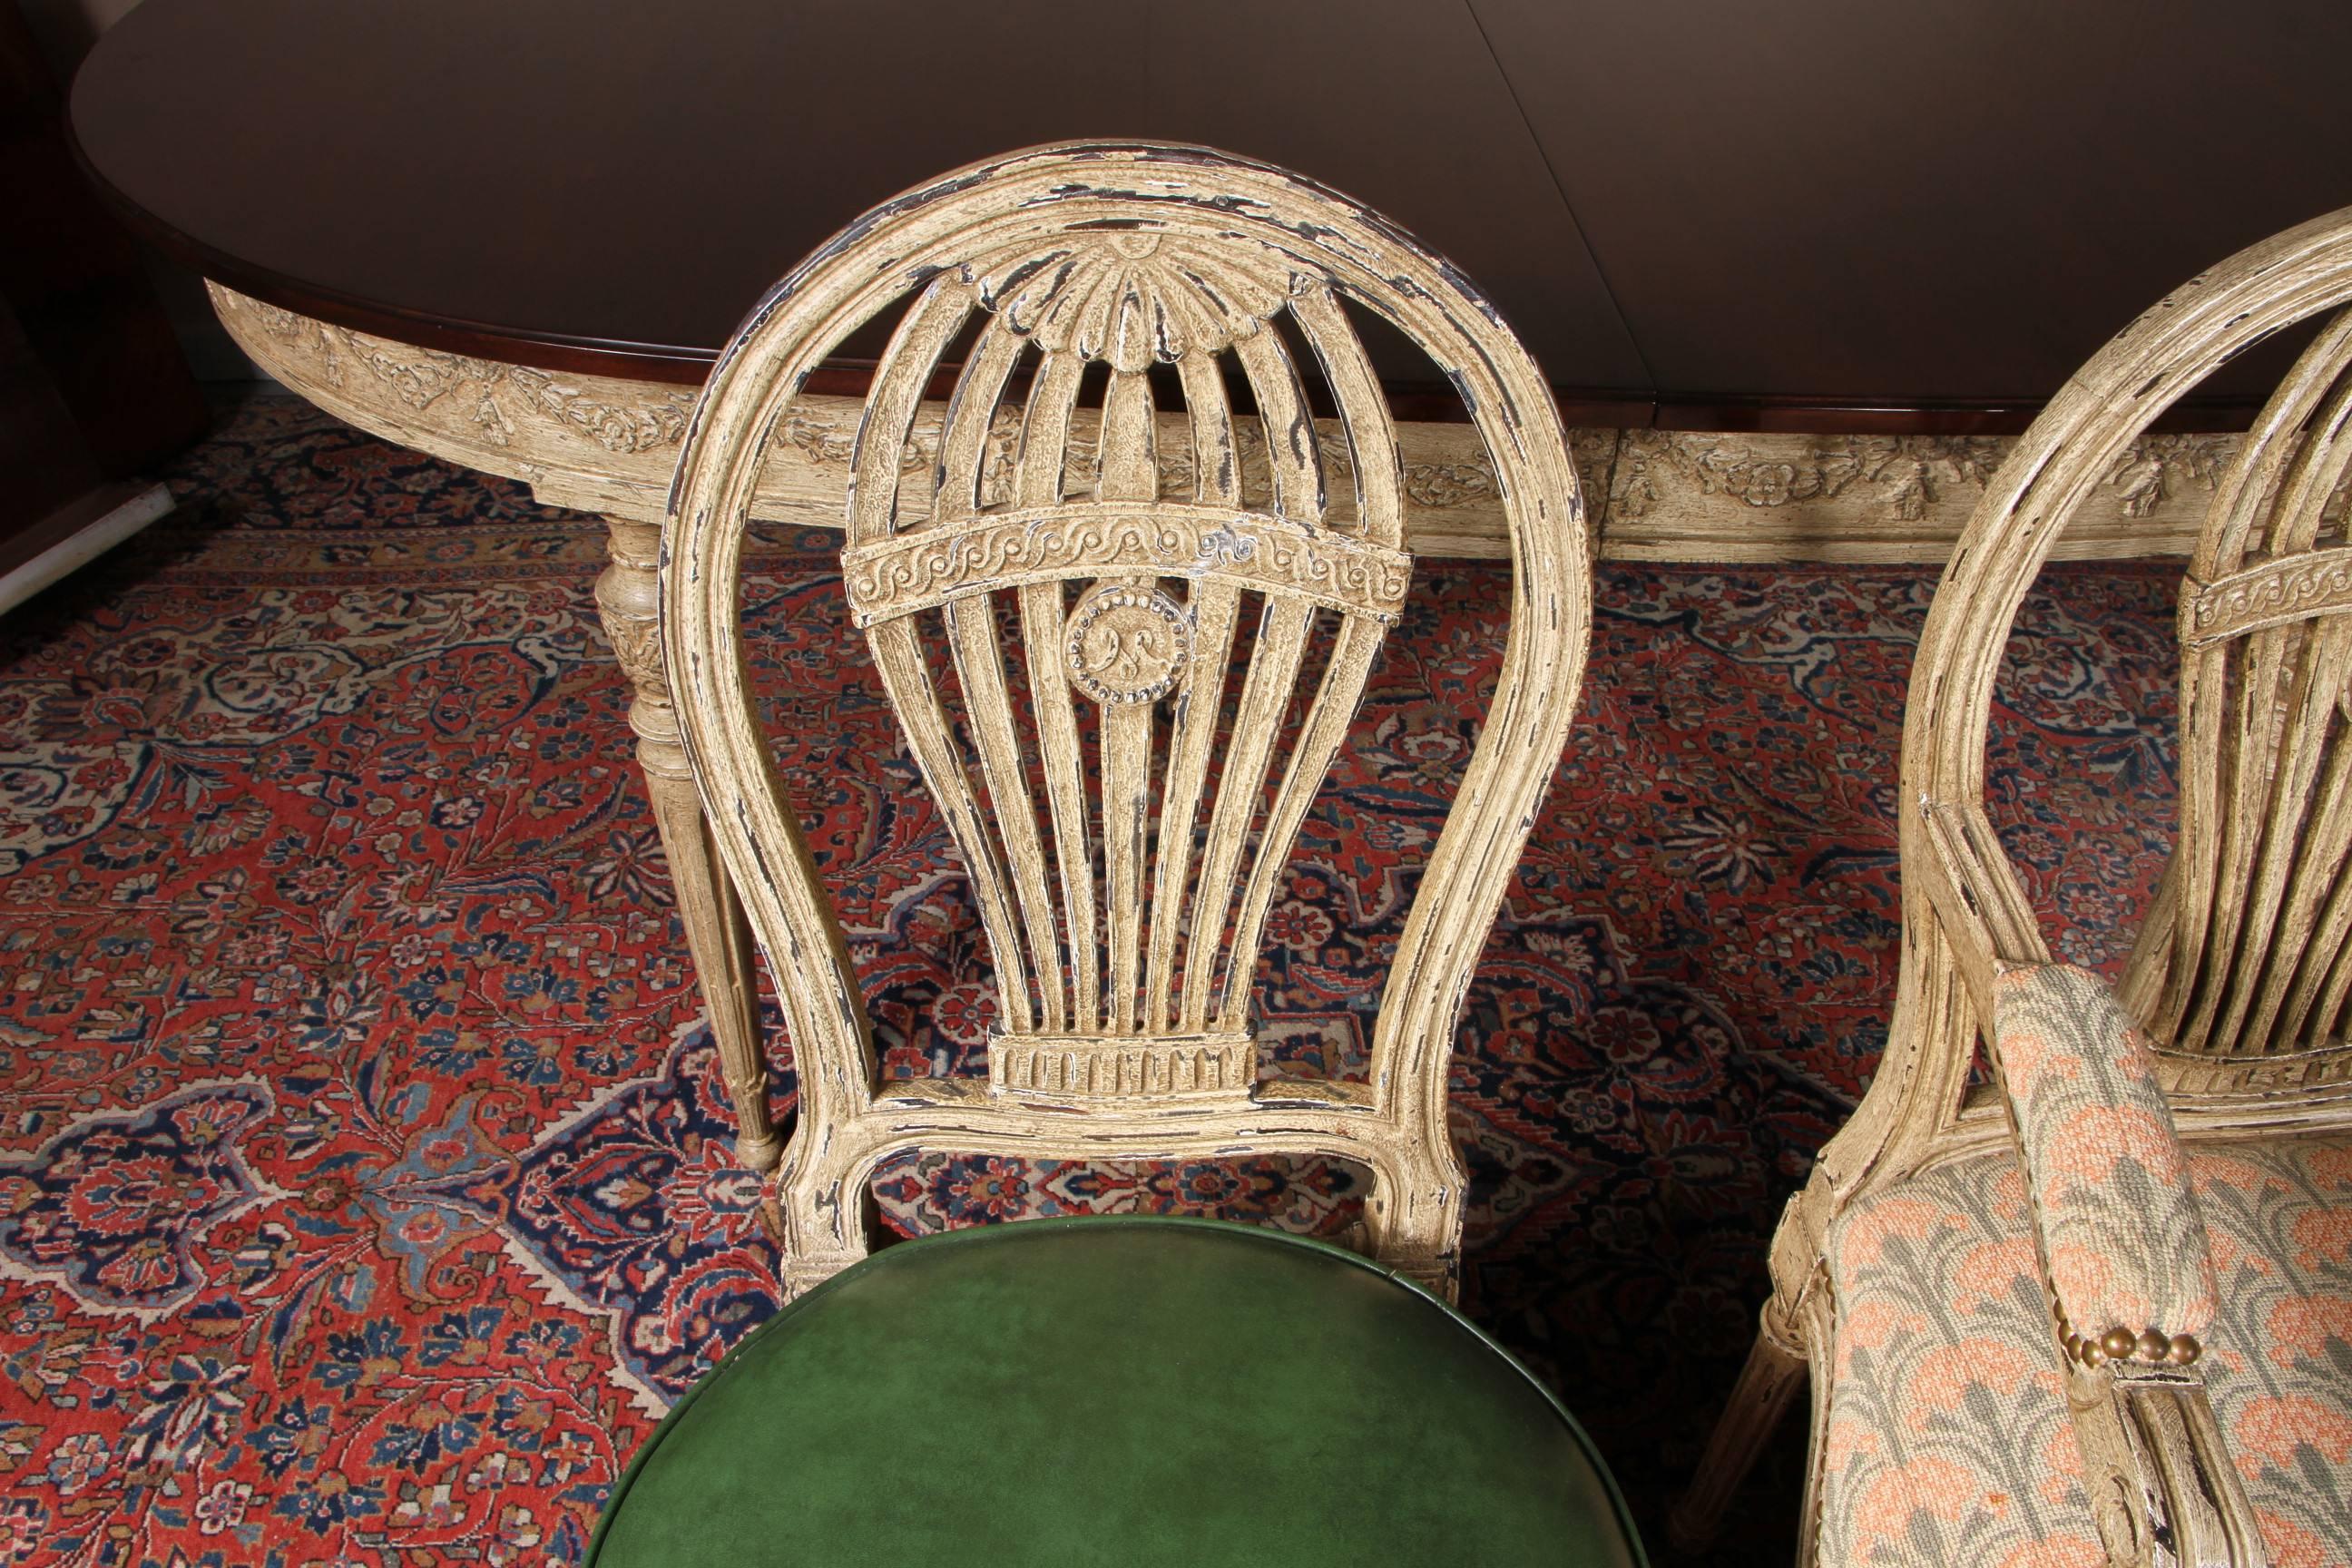 An Adams style table in a faux distressed painted finish, with oval top, garland swags on frieze, reeded, tapering, turned and carved legs ending in ball feet. Comes with two 17